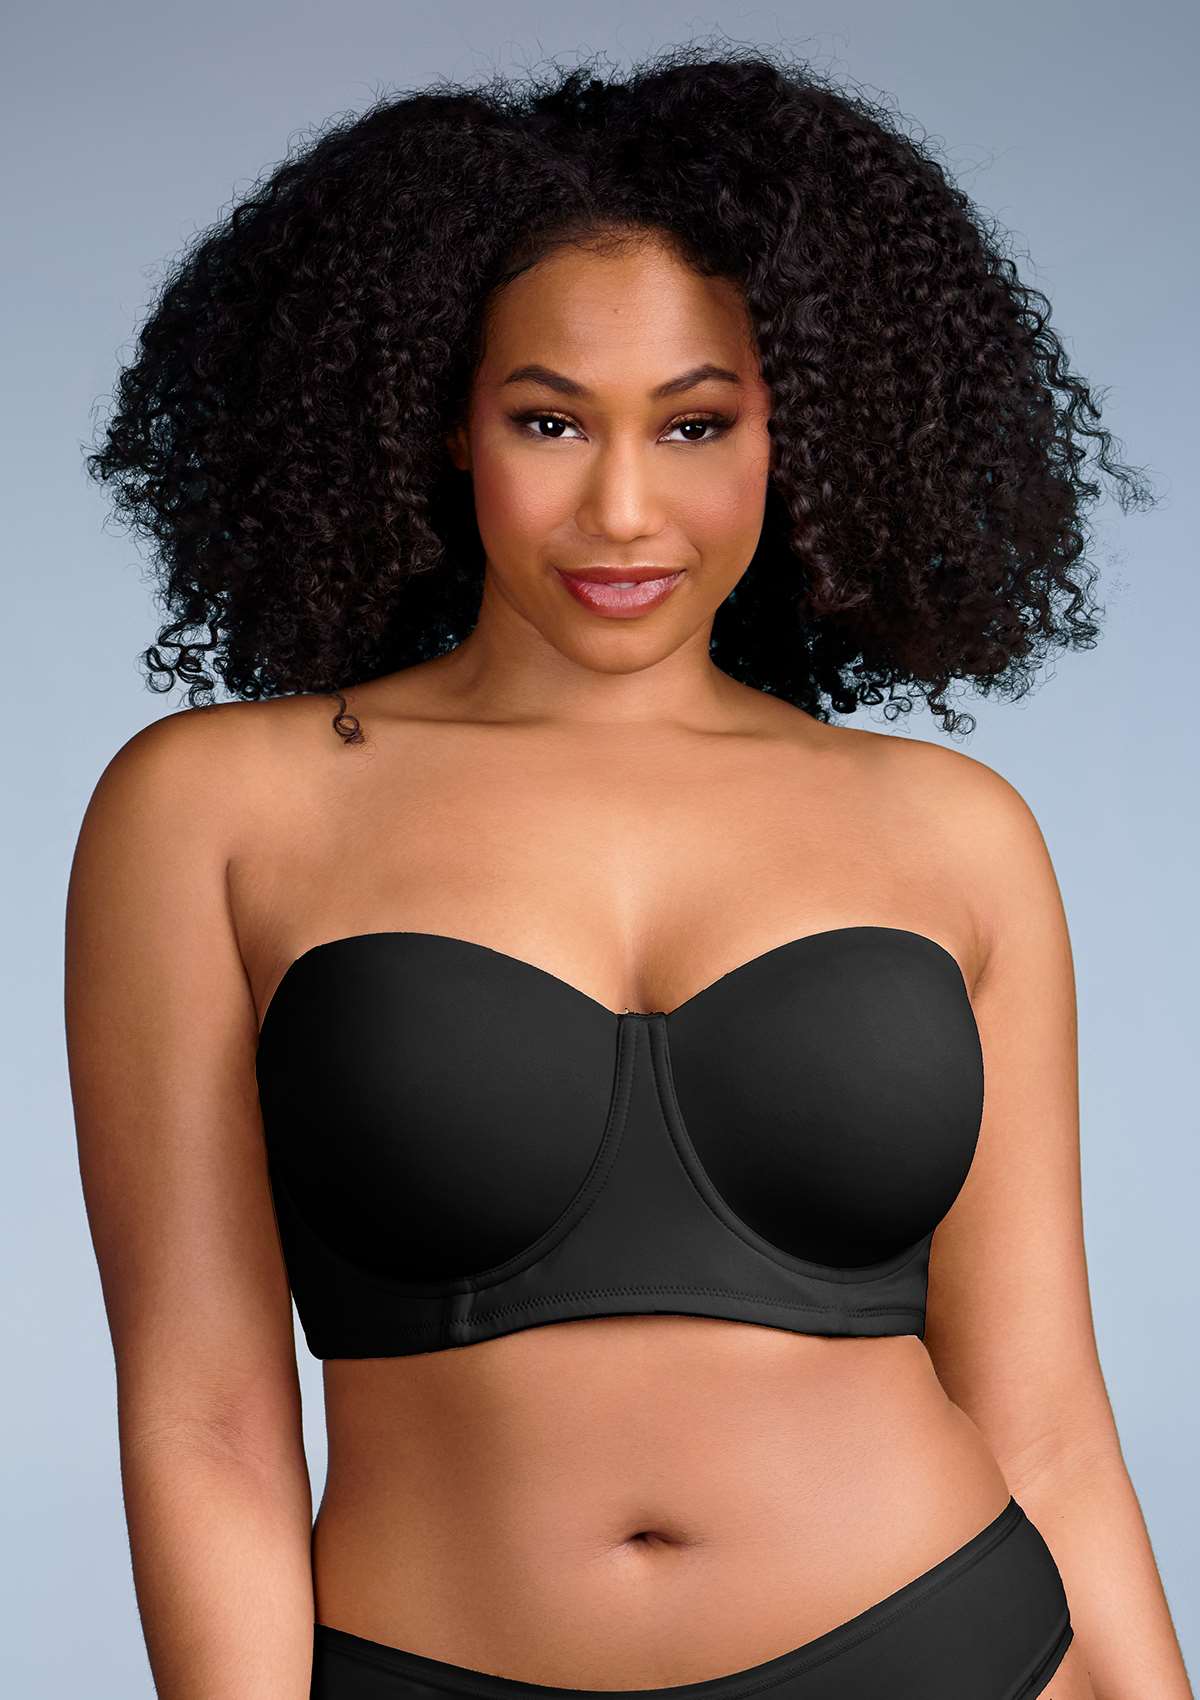 HSIA Margaret Molded Convertible Multiway Classic Strapless Bra - Black / 40 / C